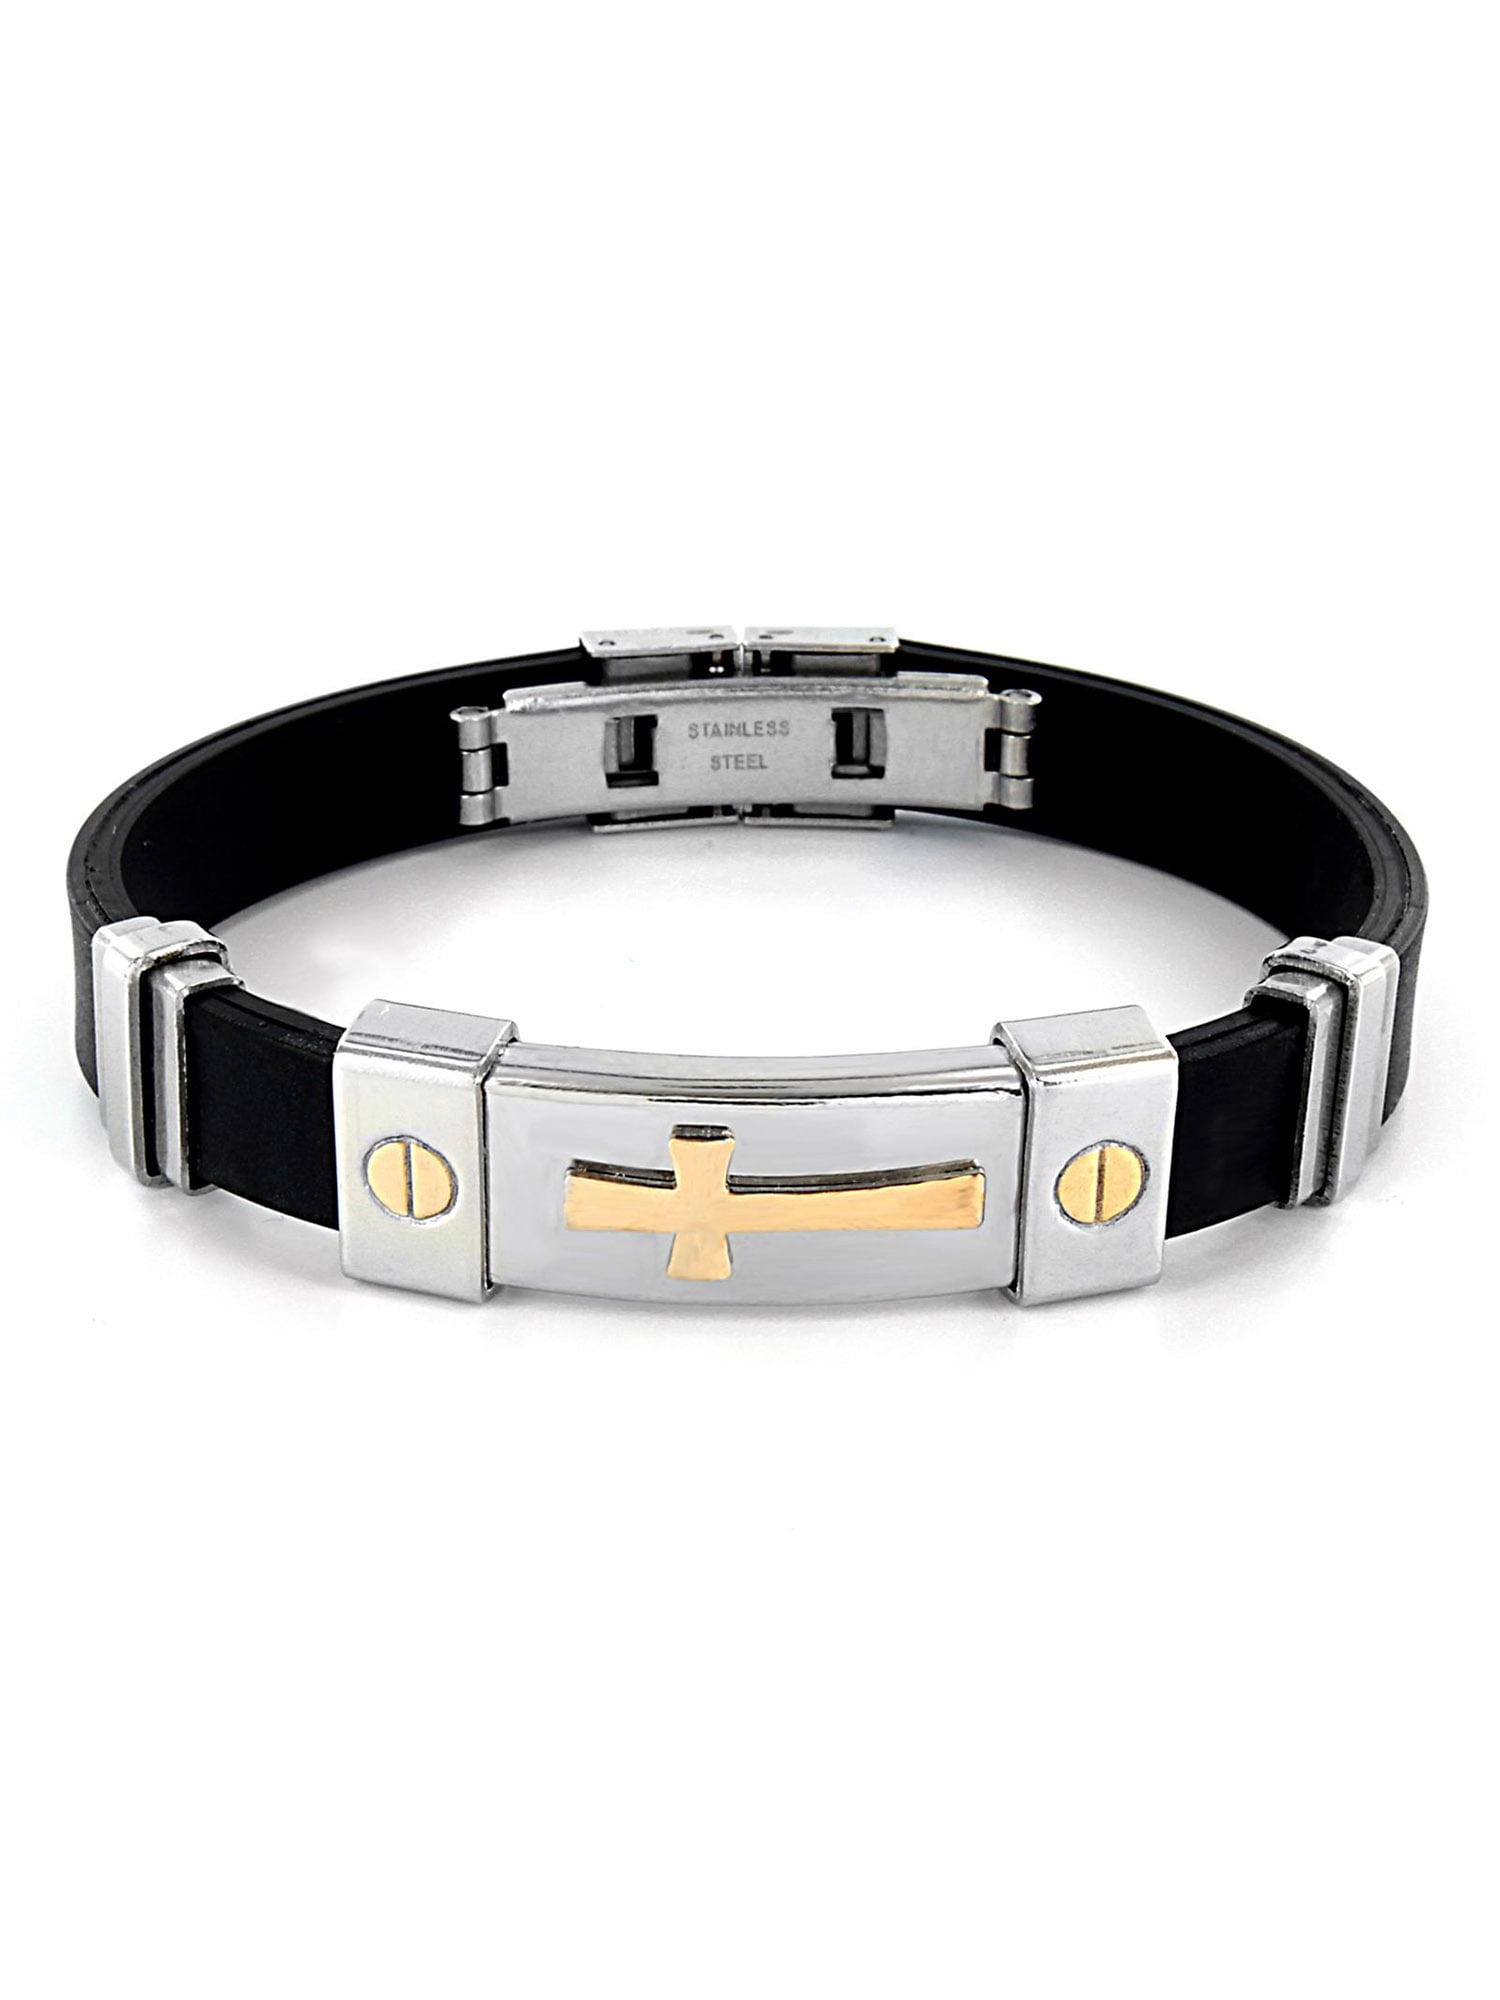 Stainless Steel Men's Gold Plated and Black Rubber Bracelet -- 8.75 Inches